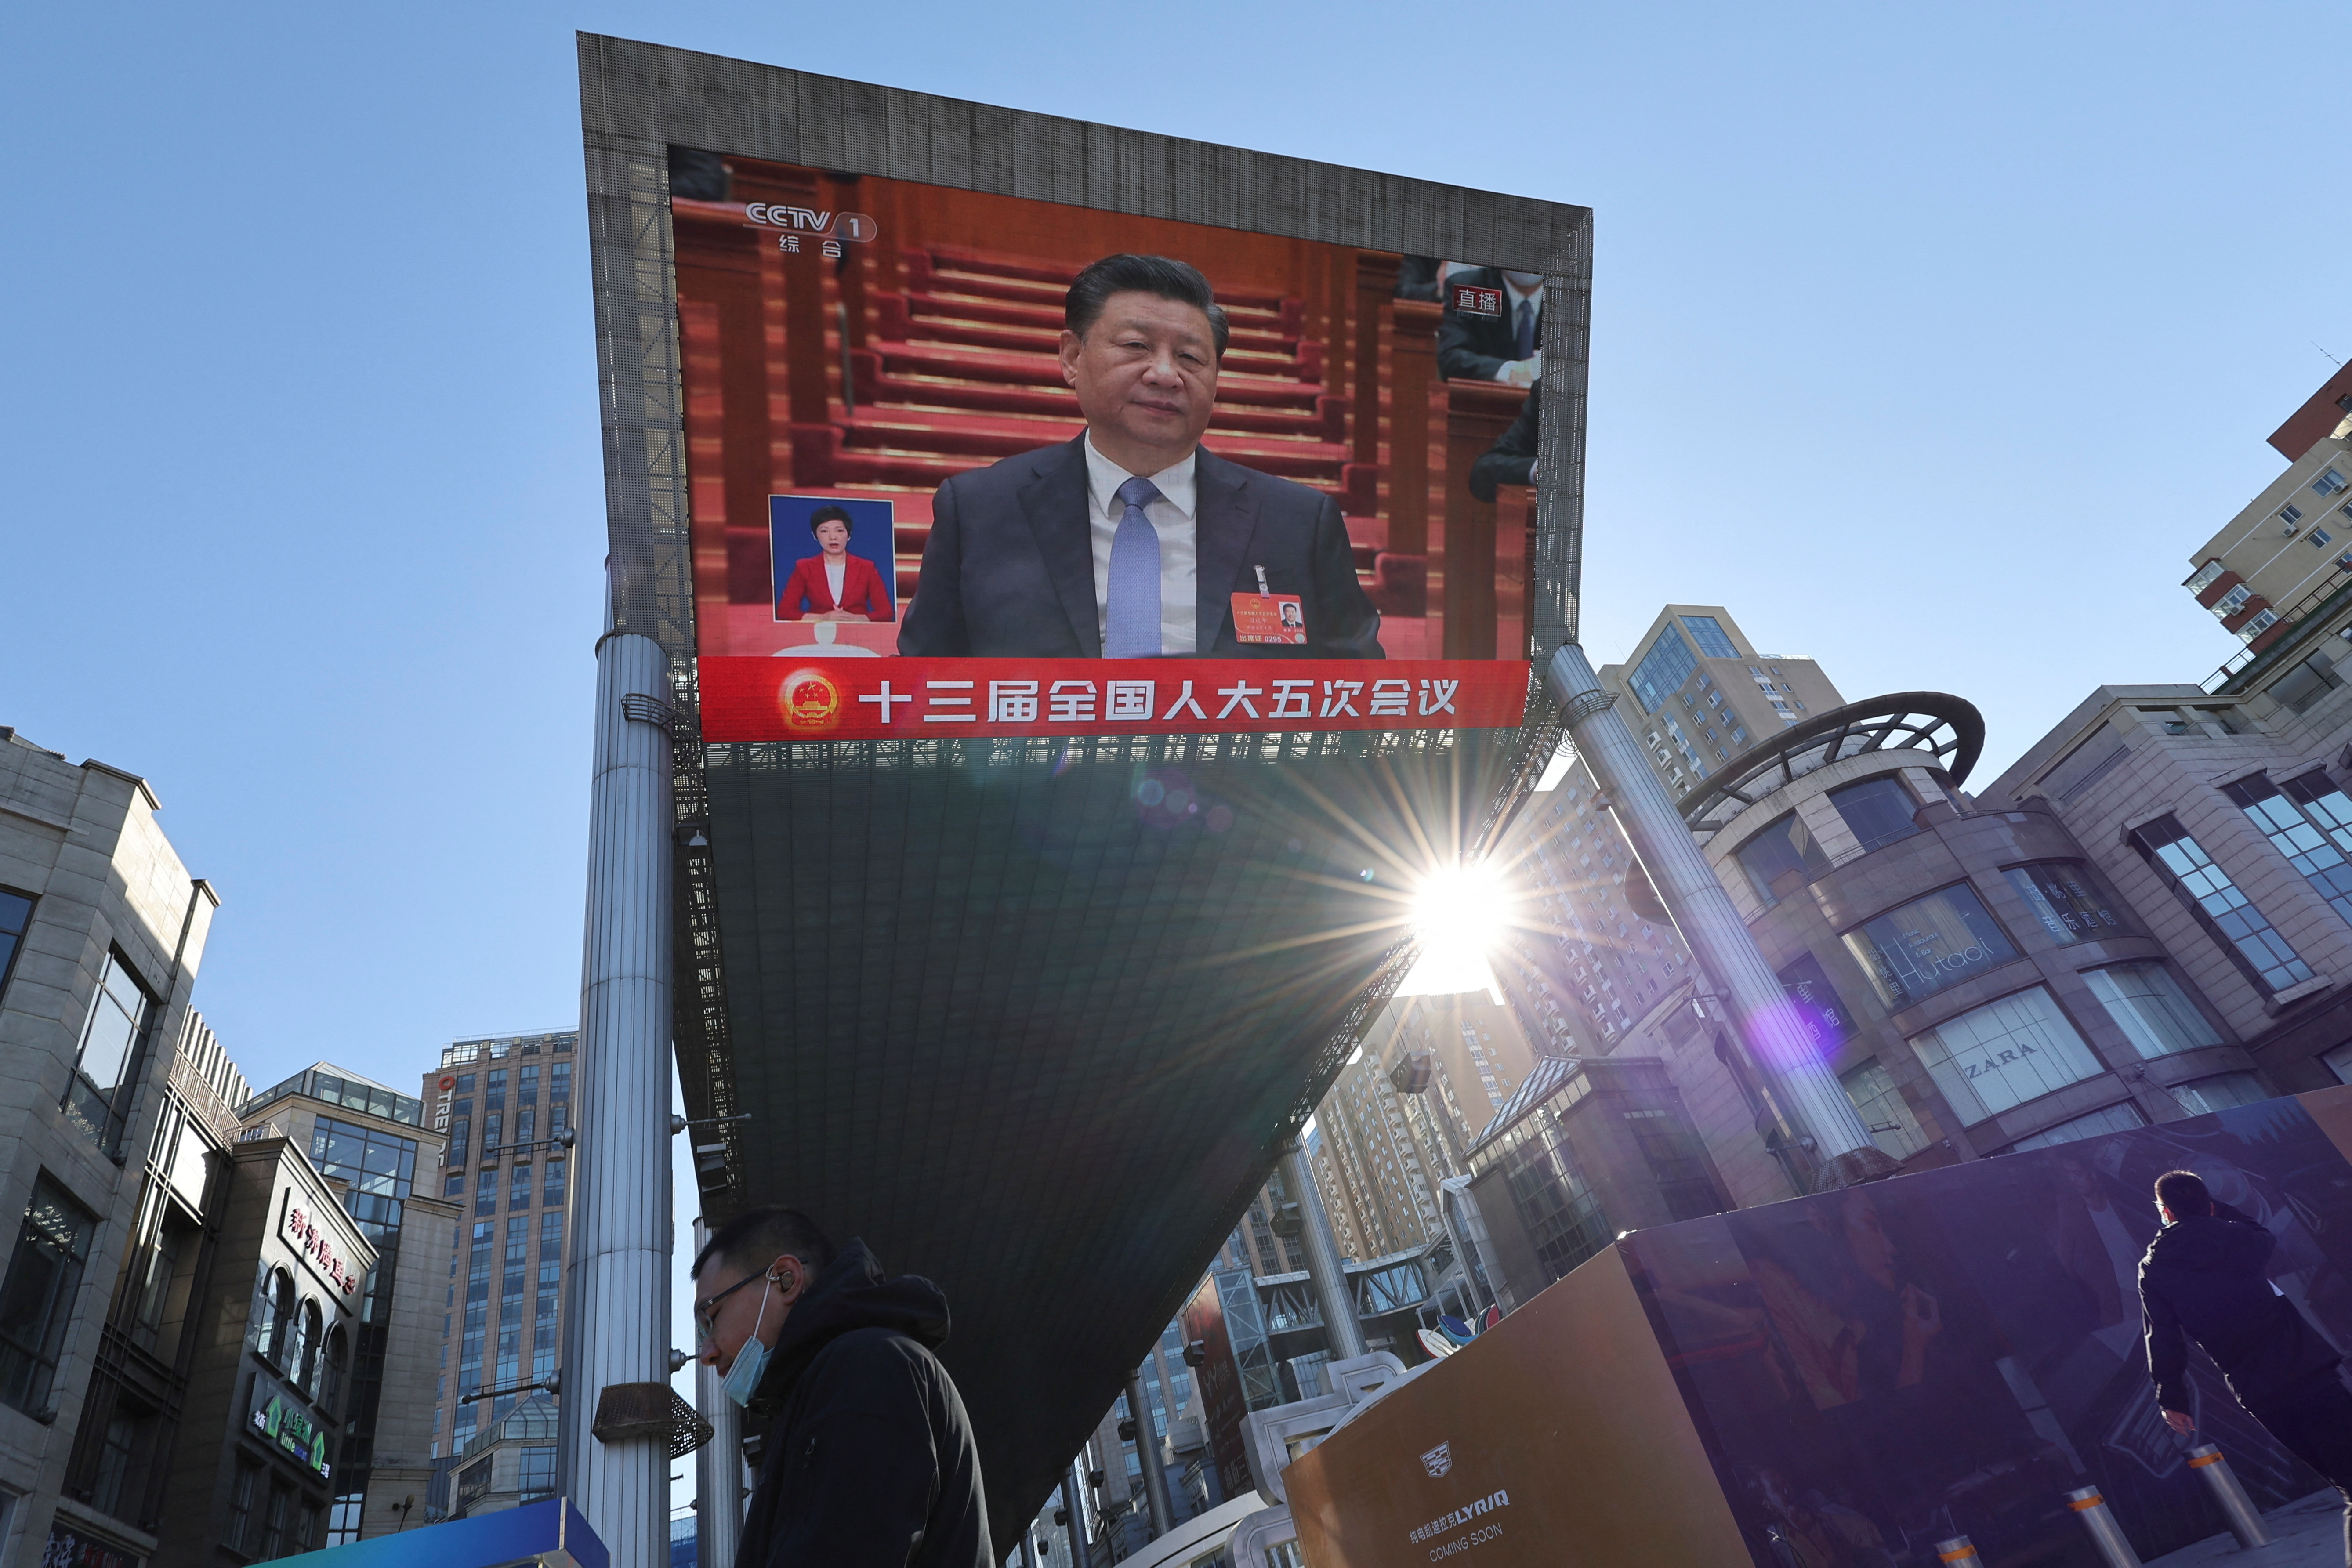 Giant screen shows Chinese President Xi Jinping attending the opening session of the National People's Congress (NPC) at the Great Hall of the People, in Beijing